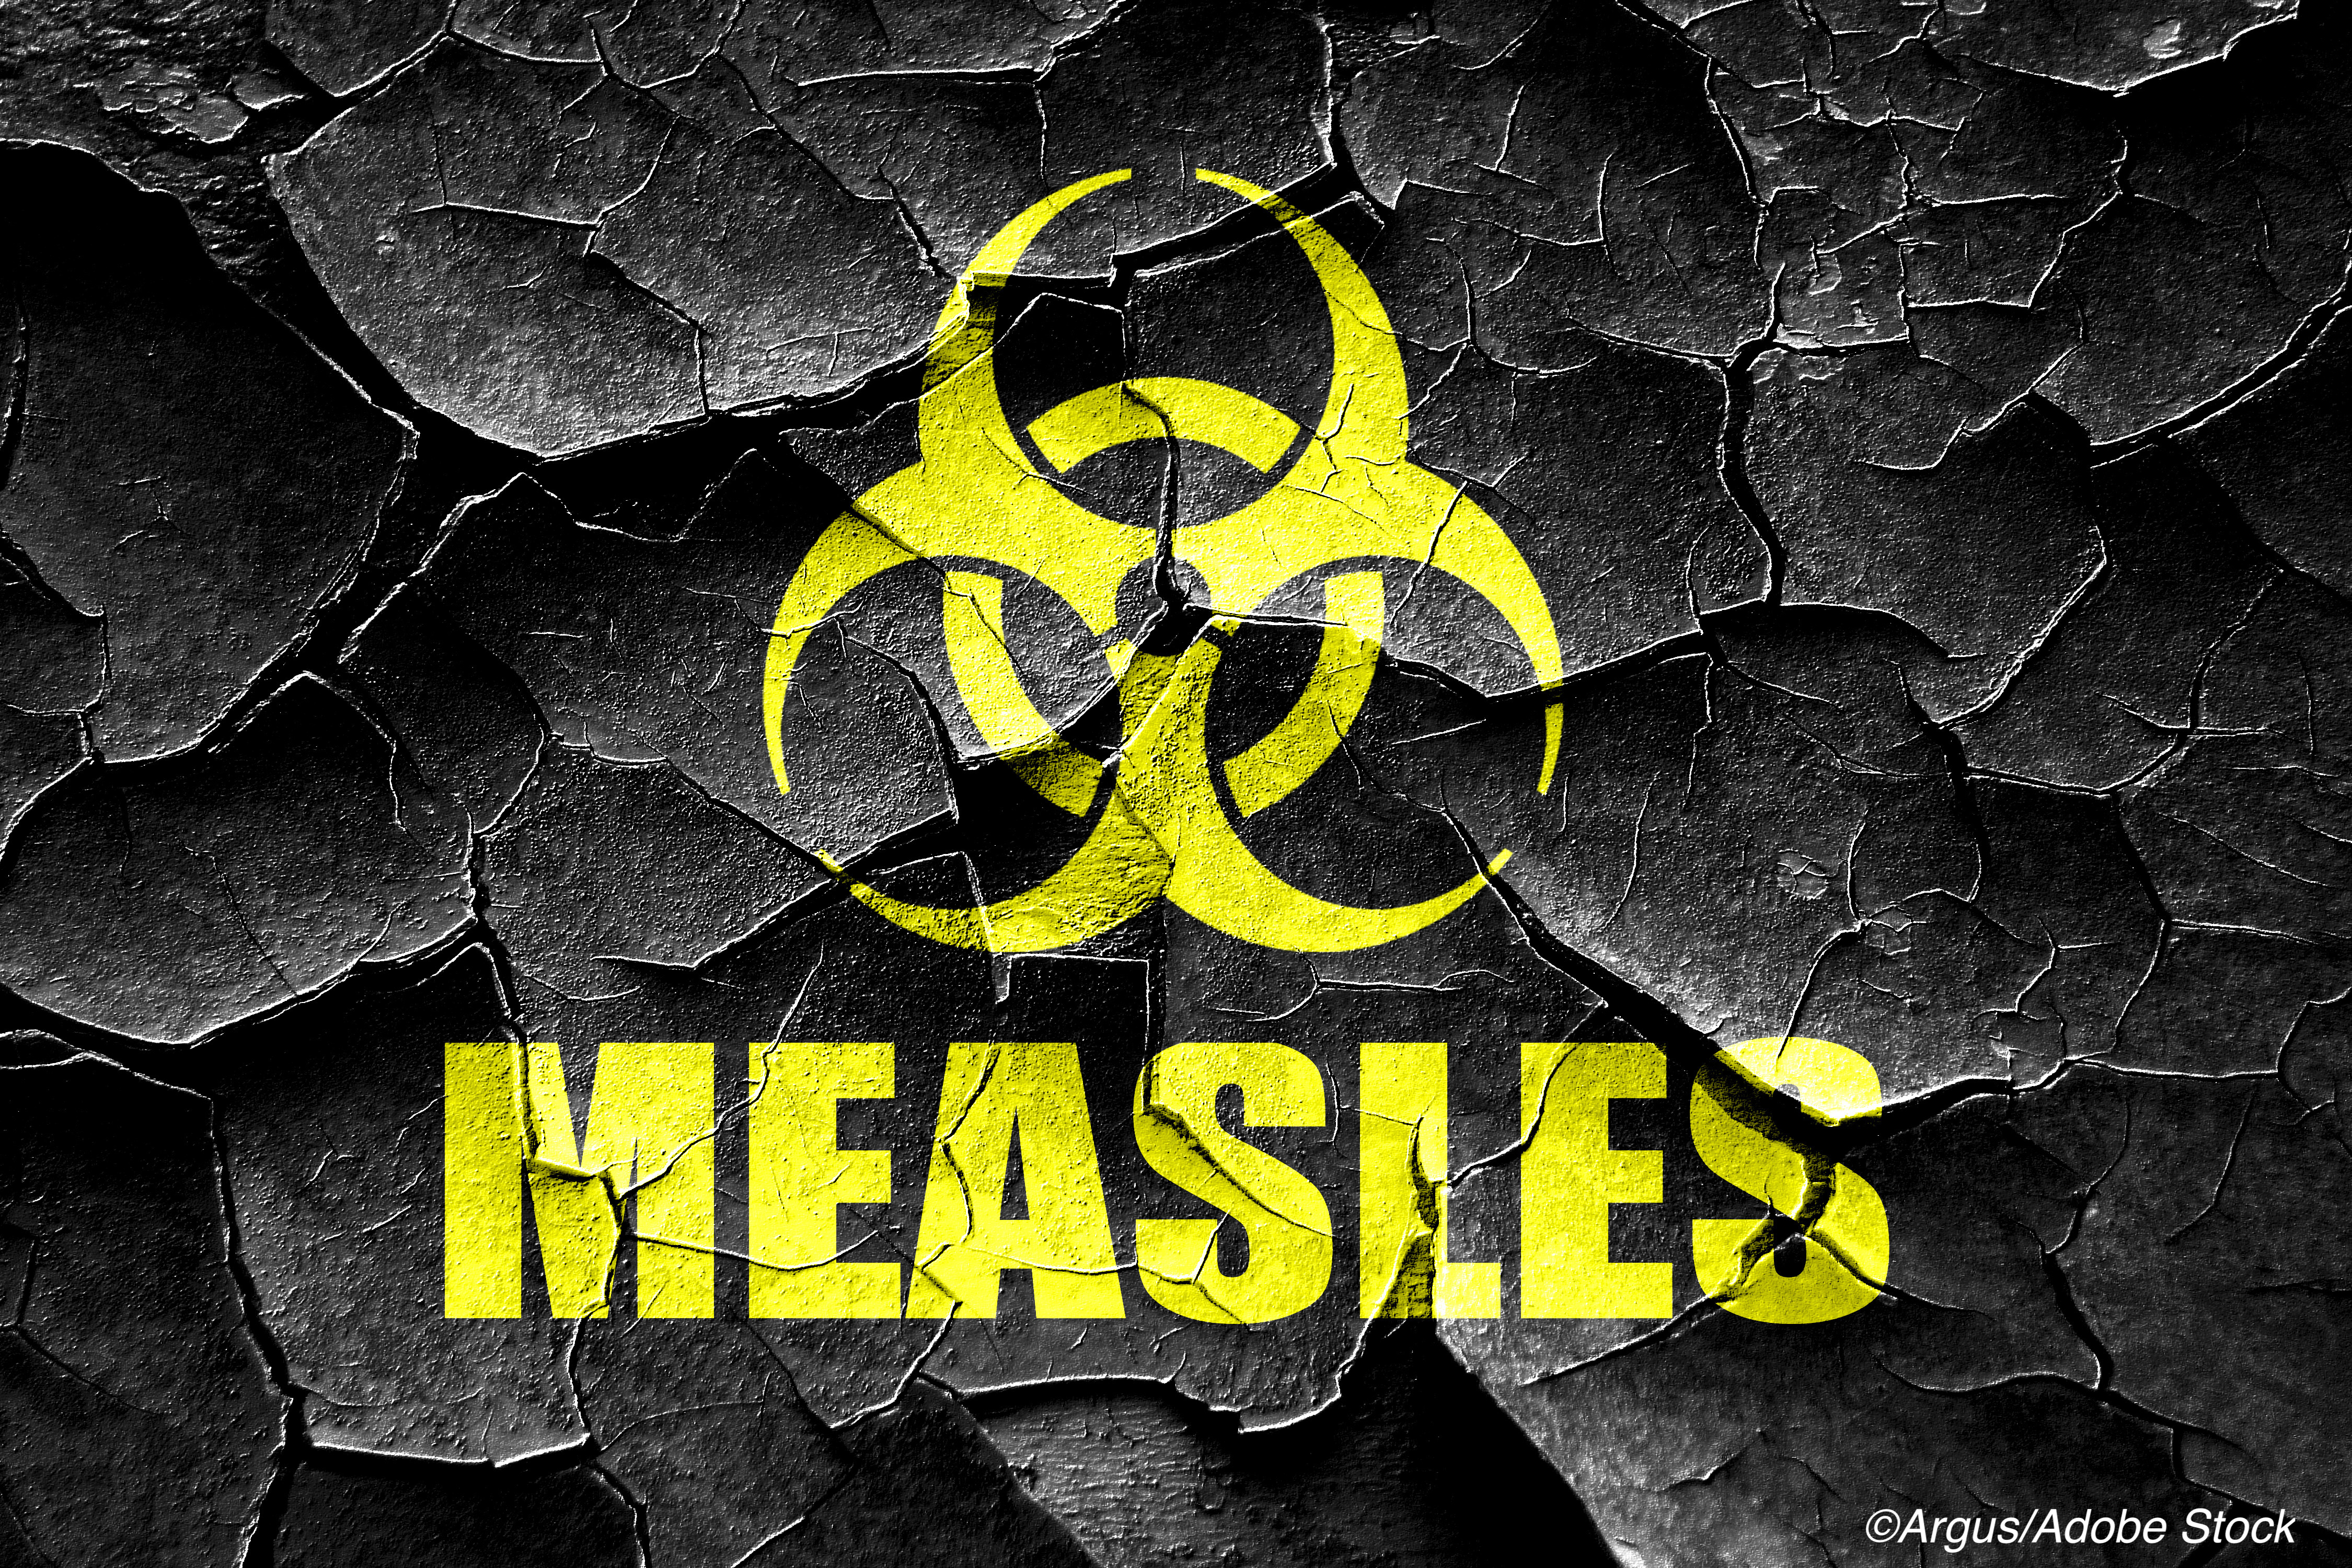 Measles: 2019 Single-County Outbreak Costs Millions